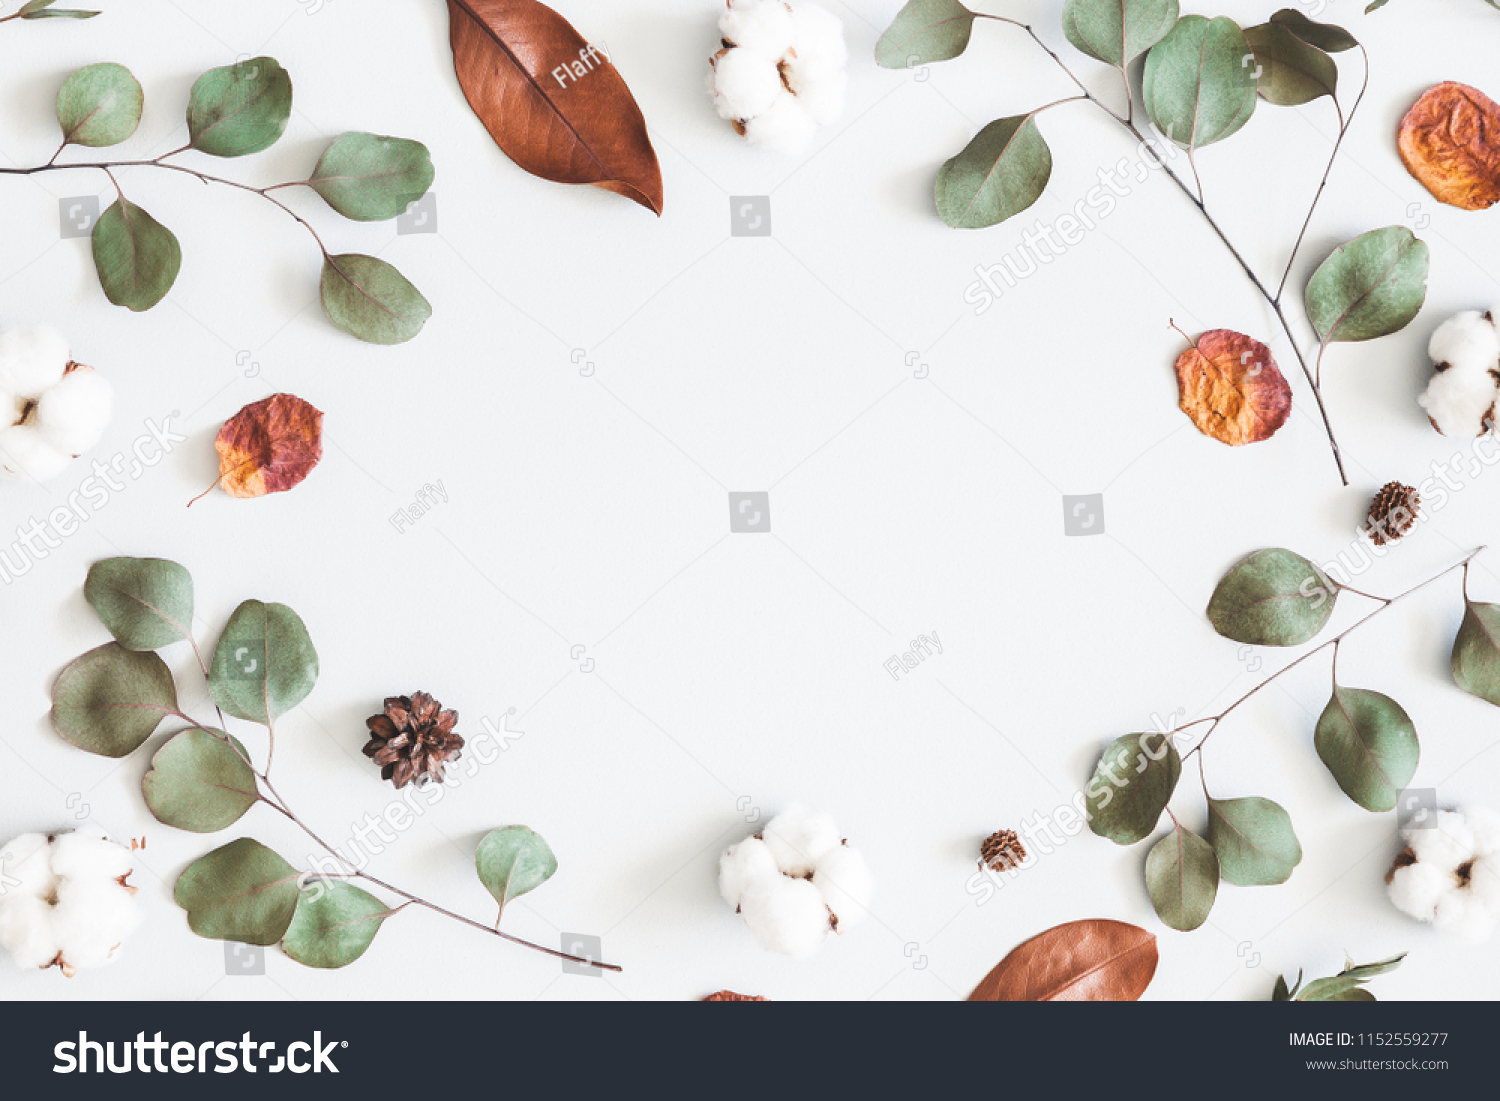 Autumn composition. Frame made of eucalyptus branches, cotton flowers, dried leaves on pastel gray background. Autumn, fall concept. Flat lay, top view, copy space #1152559277